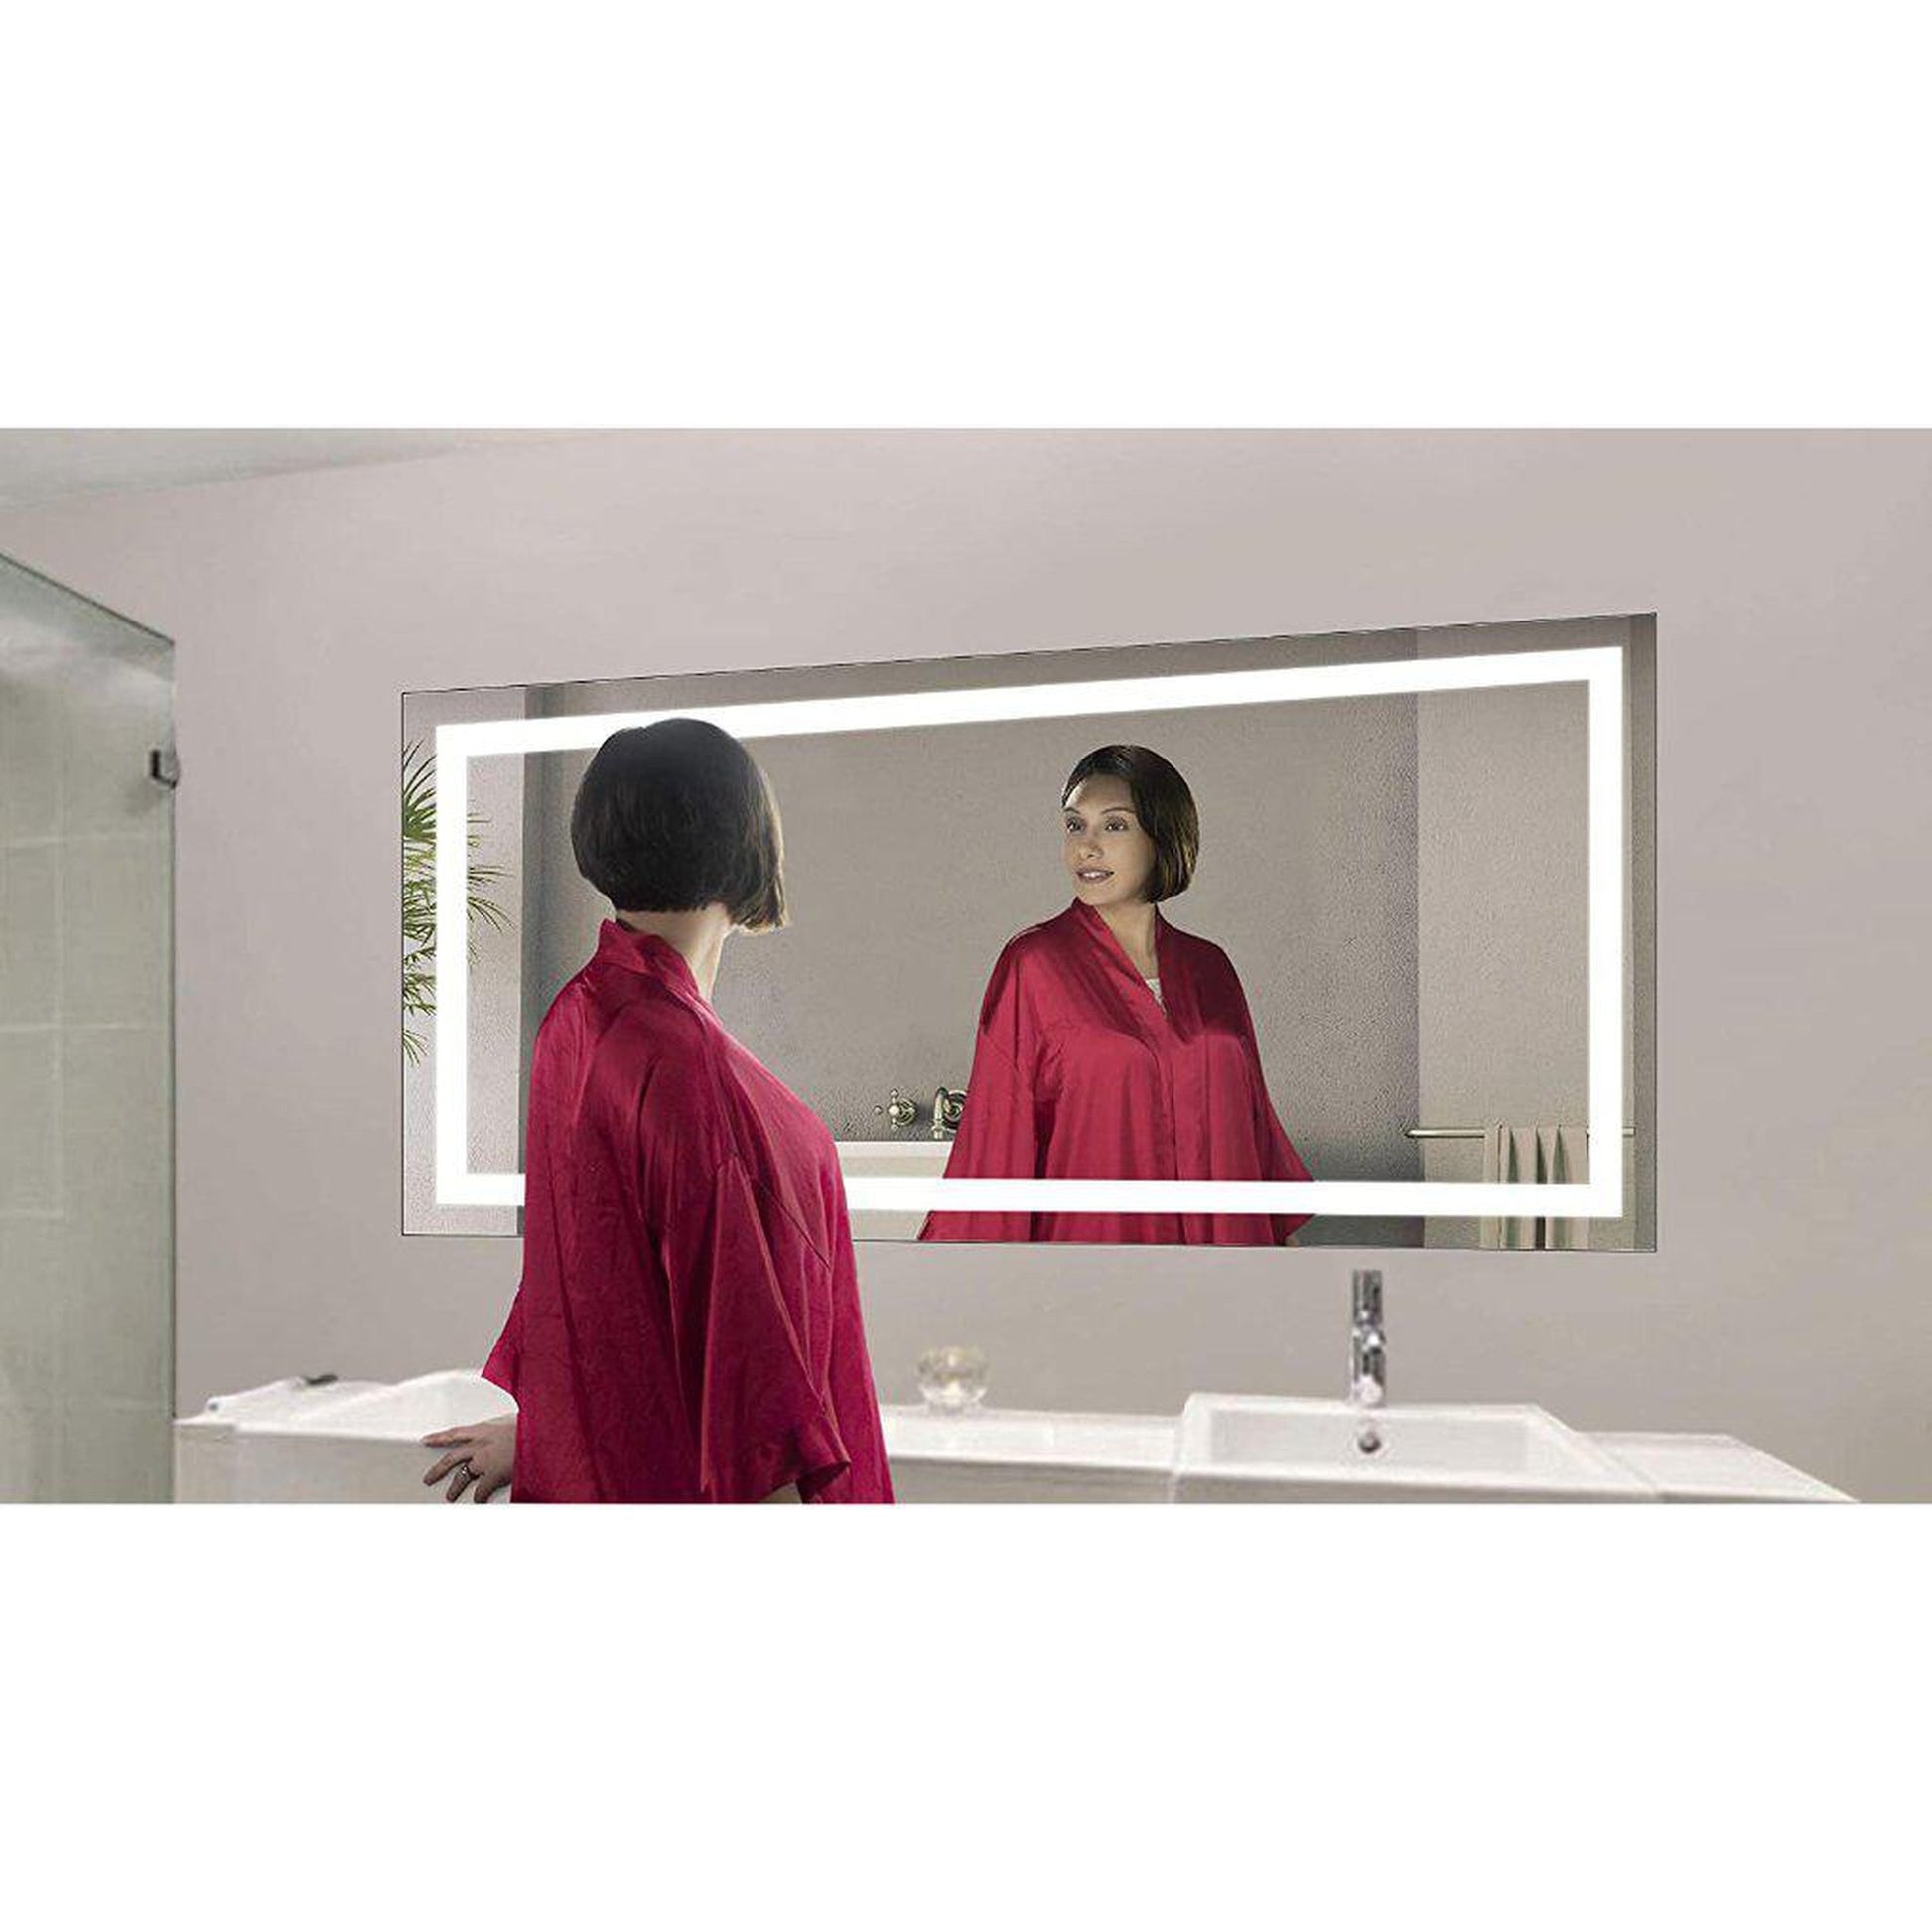 Krugg Reflections Icon 60" x 30" 5000K Rectangular Wall-Mounted Illuminated Silver Backed LED Mirror With Built-in Defogger and Touch Sensor On/Off Built-in Dimmer